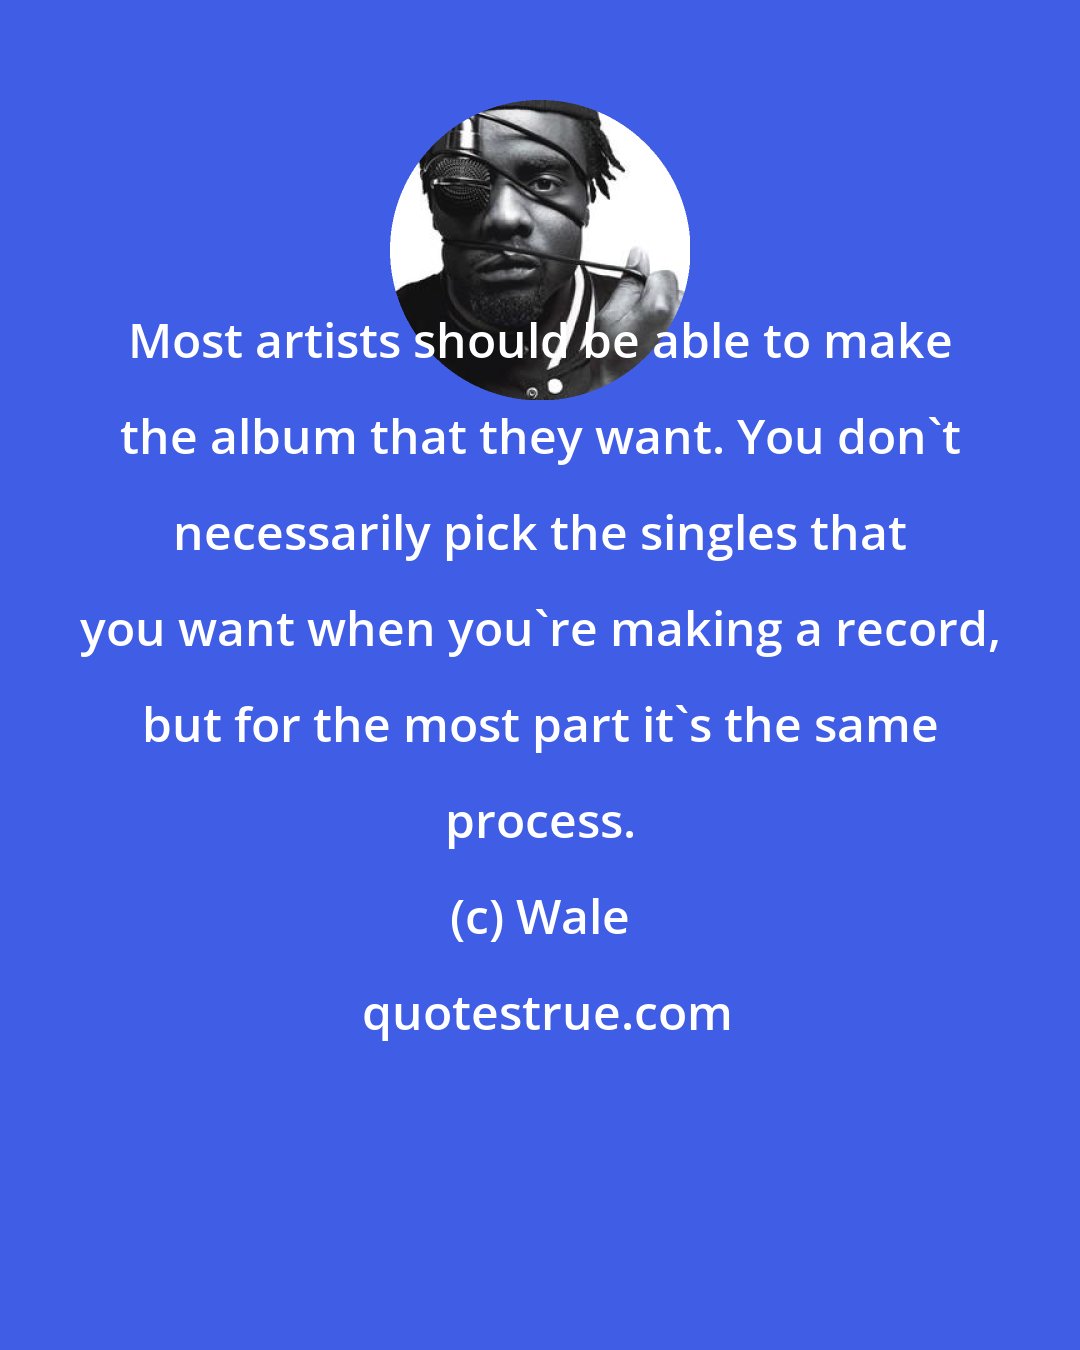 Wale: Most artists should be able to make the album that they want. You don't necessarily pick the singles that you want when you're making a record, but for the most part it's the same process.